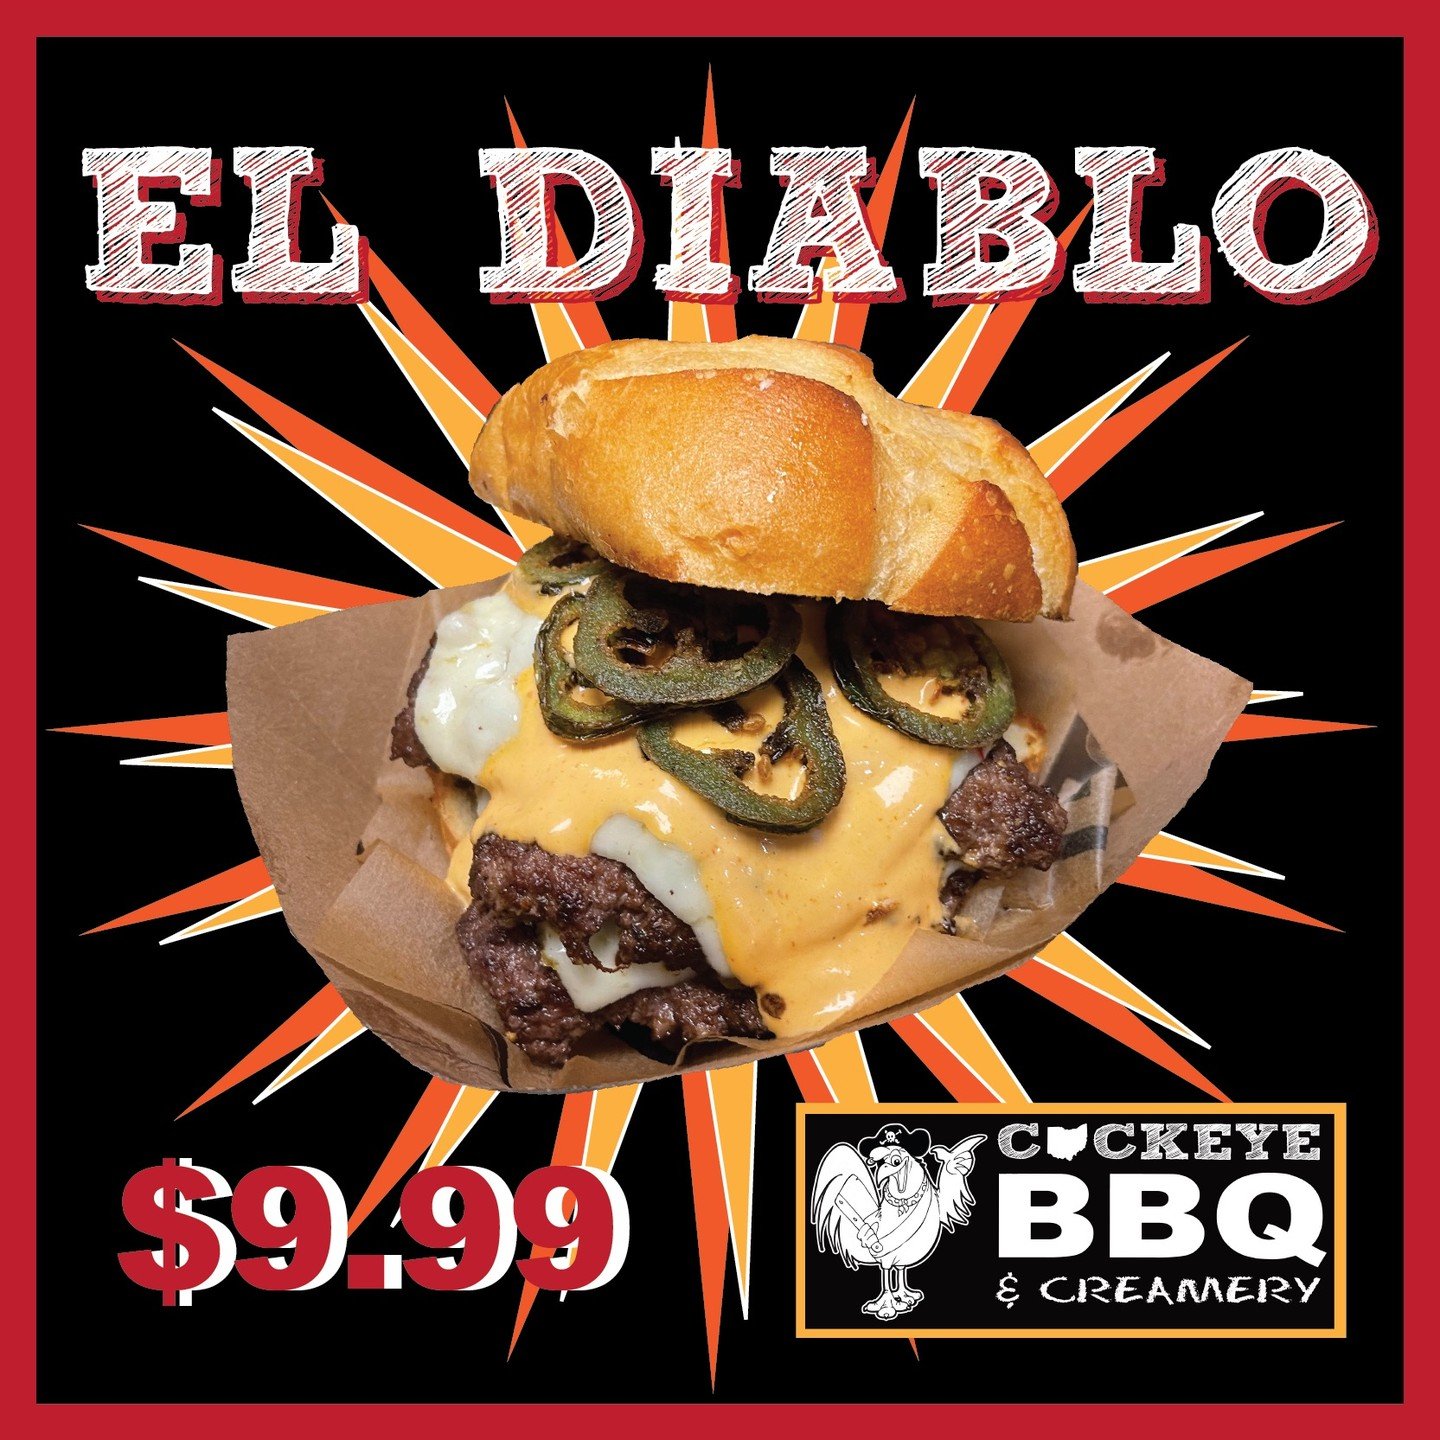 EL DIABLO!
Ya'll might remember this one from a few years ago. We wandered down memory lane and decided to bring this one back for a little while. 
Two of our brisket smash burgers, pepper jack cheese, house made sriracha mayo and lightly breaded and